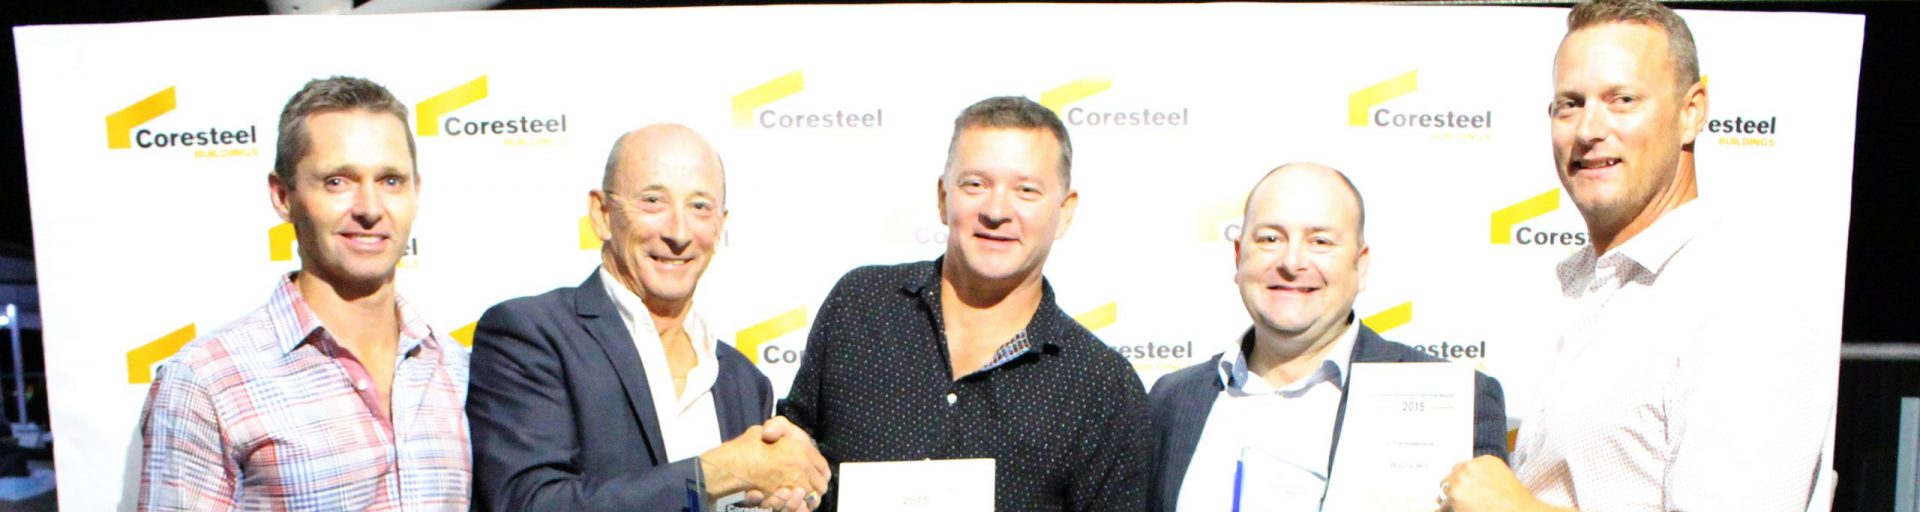 coresteel northland win award at conference